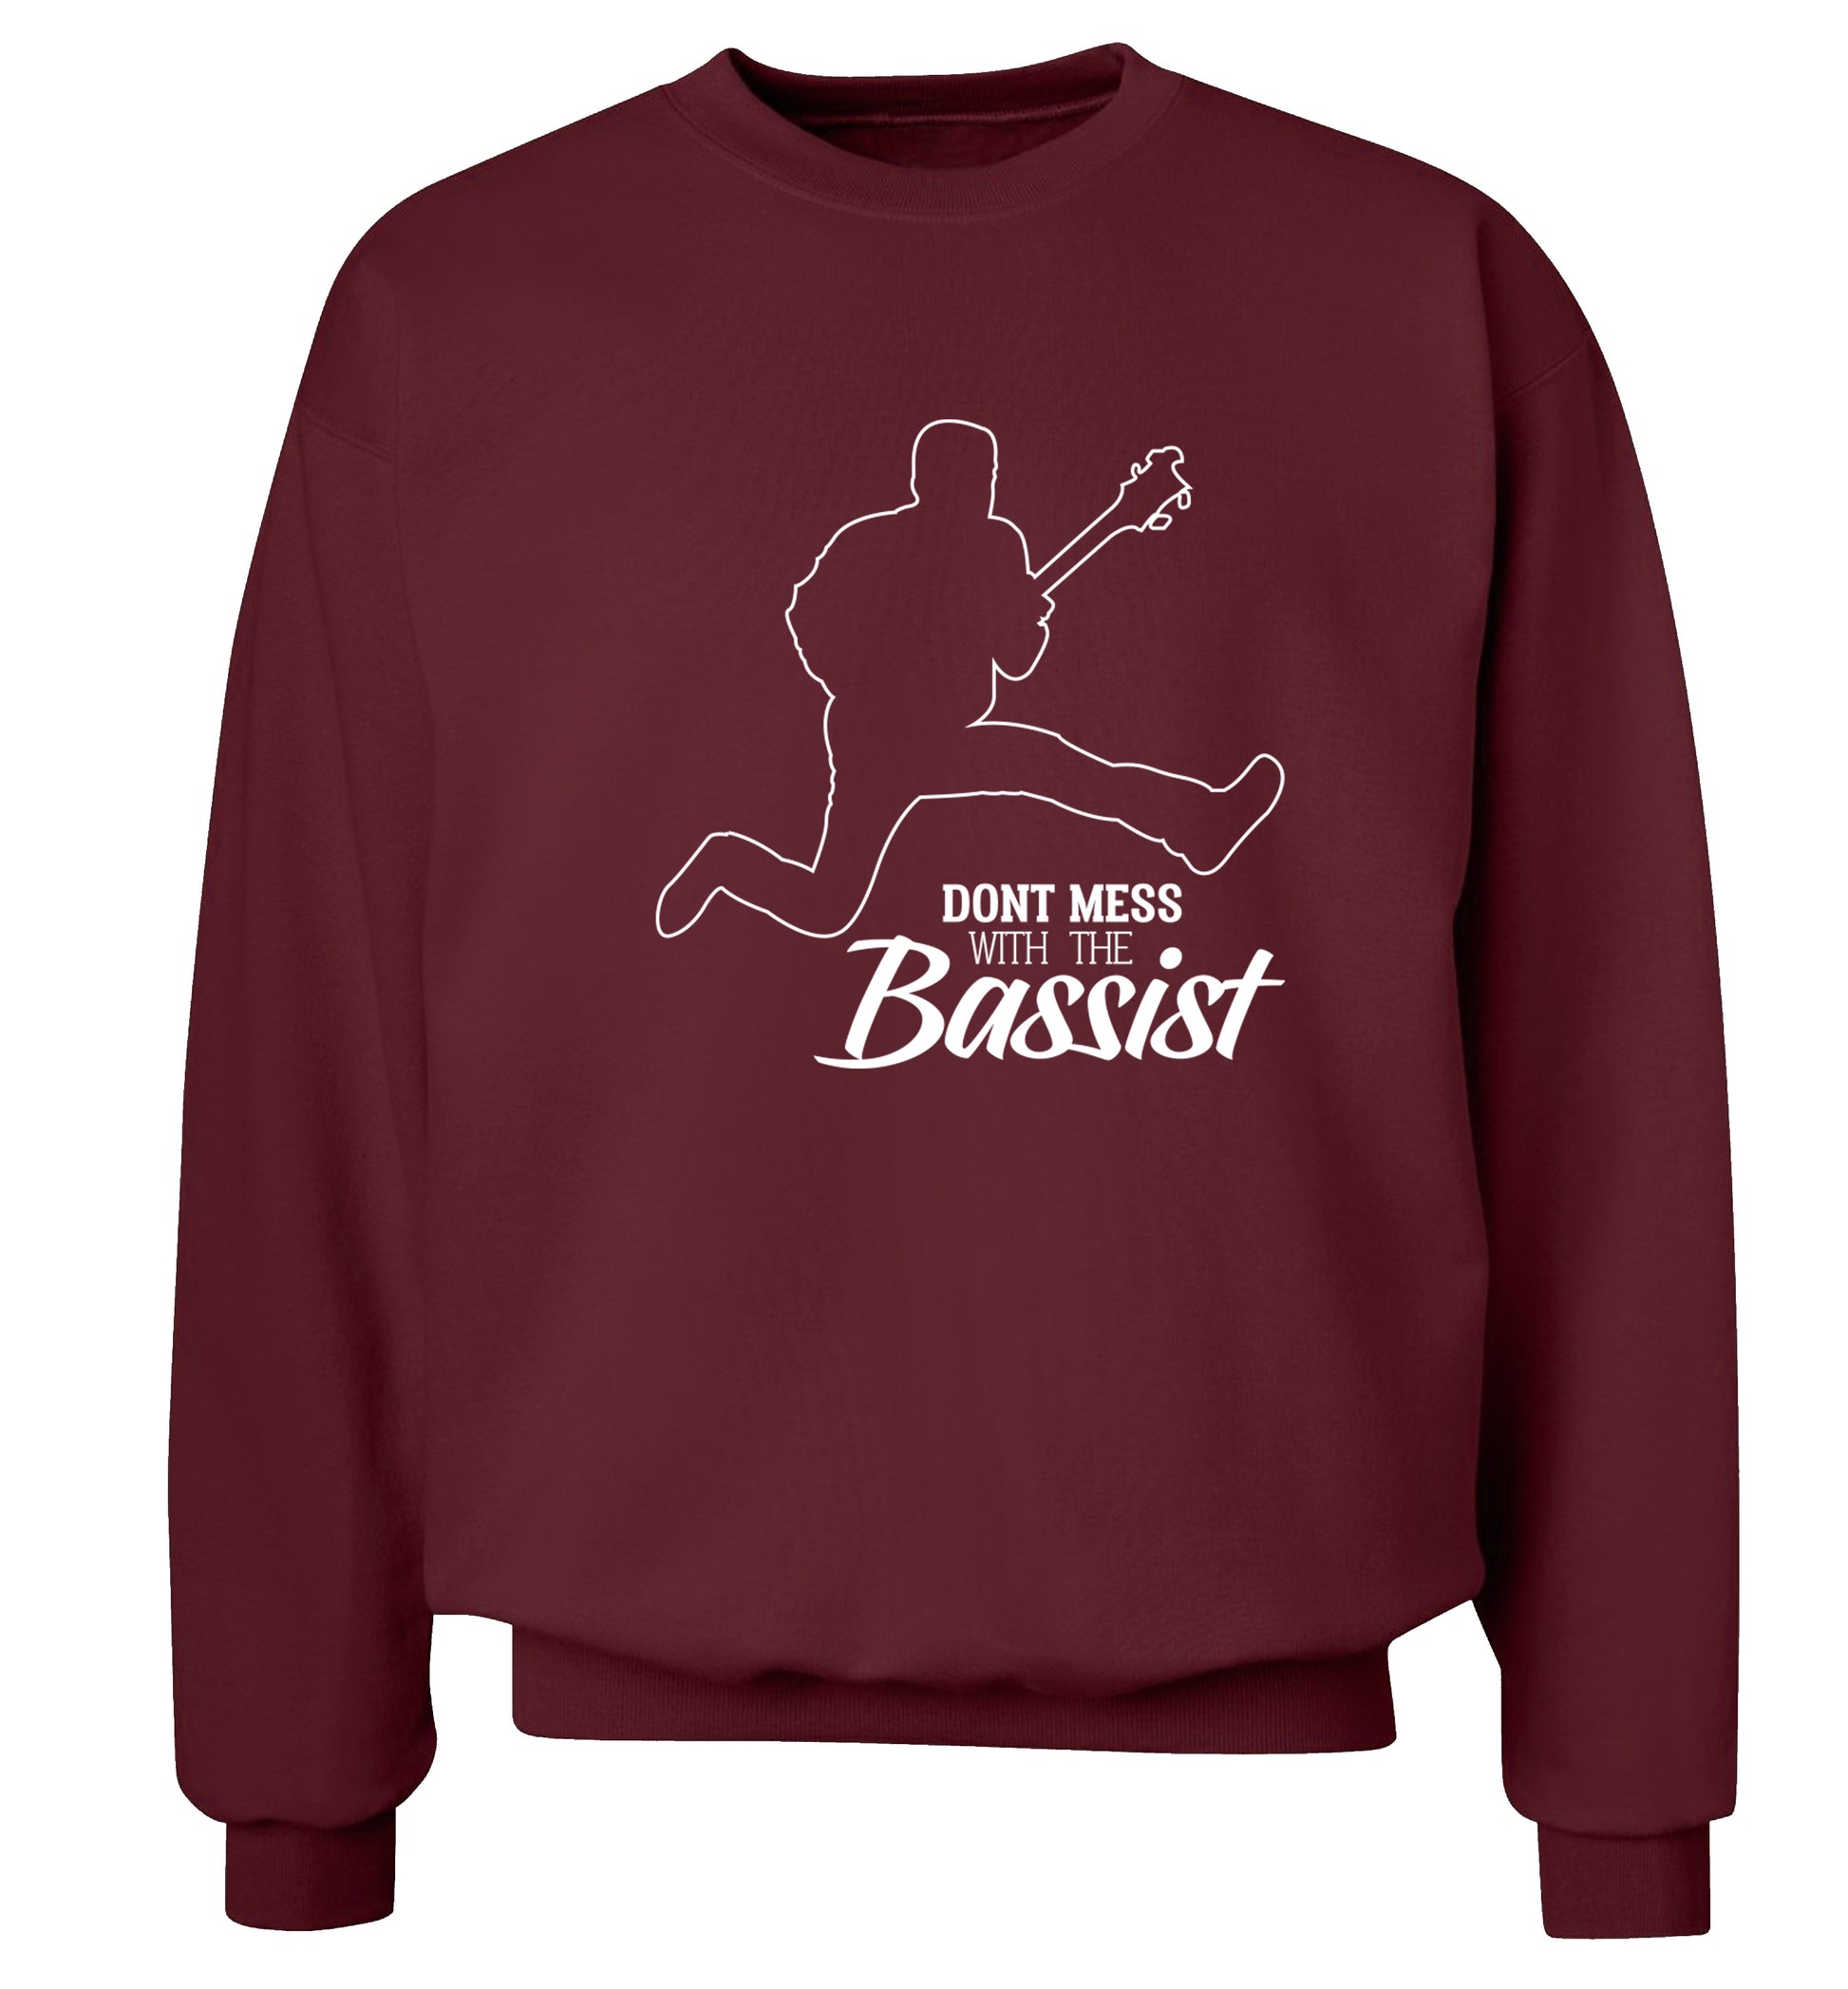 Dont mess with the bassist Adult's unisex maroon Sweater 2XL